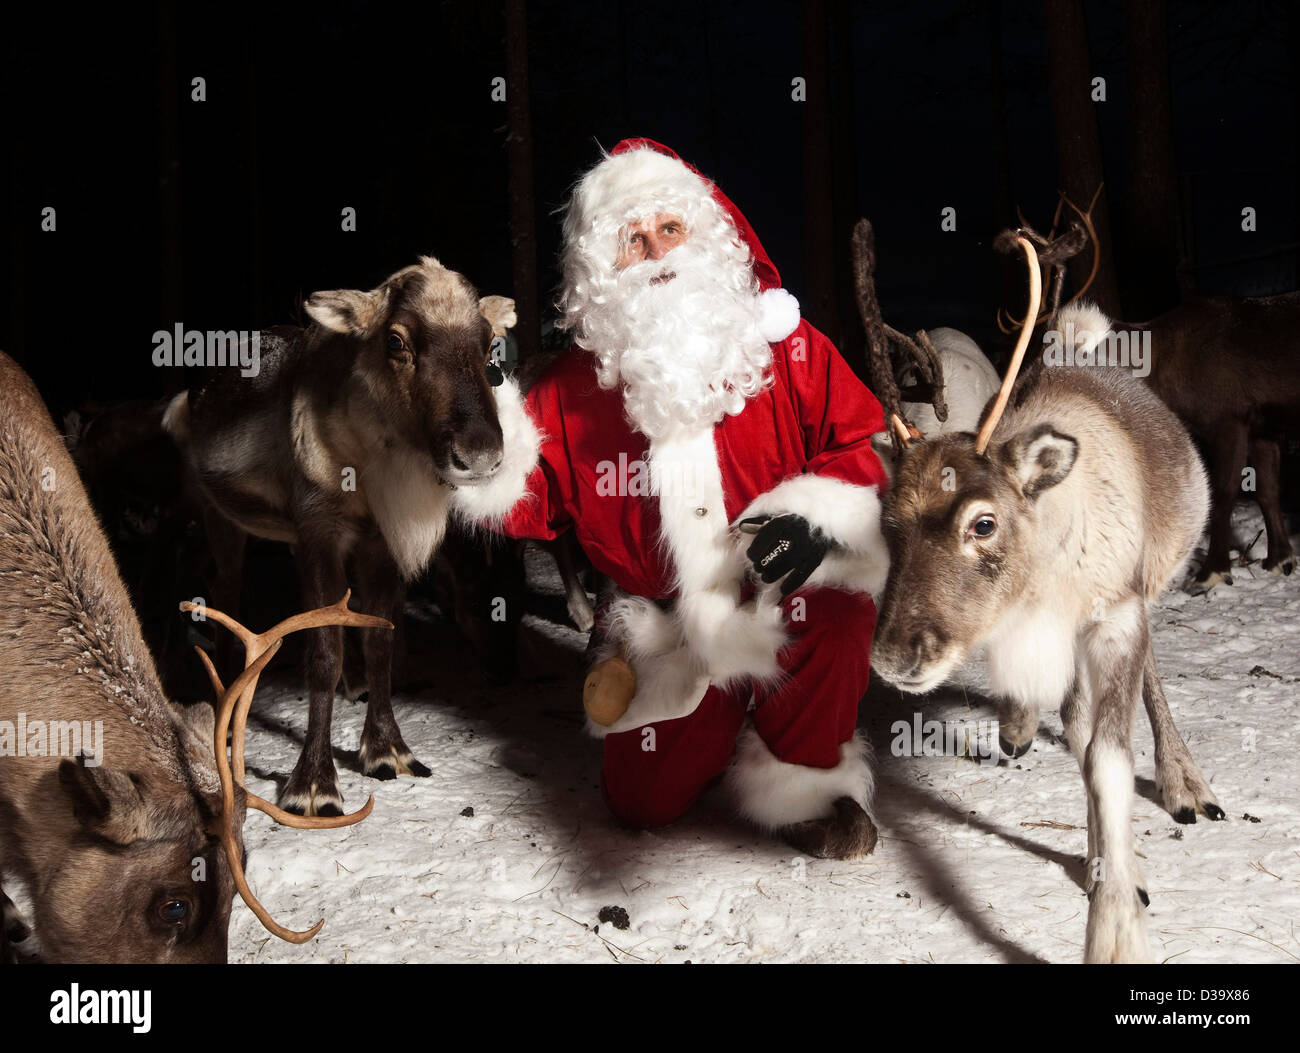 Man in father christmas costume with reindeer, Lapland Stock Photo